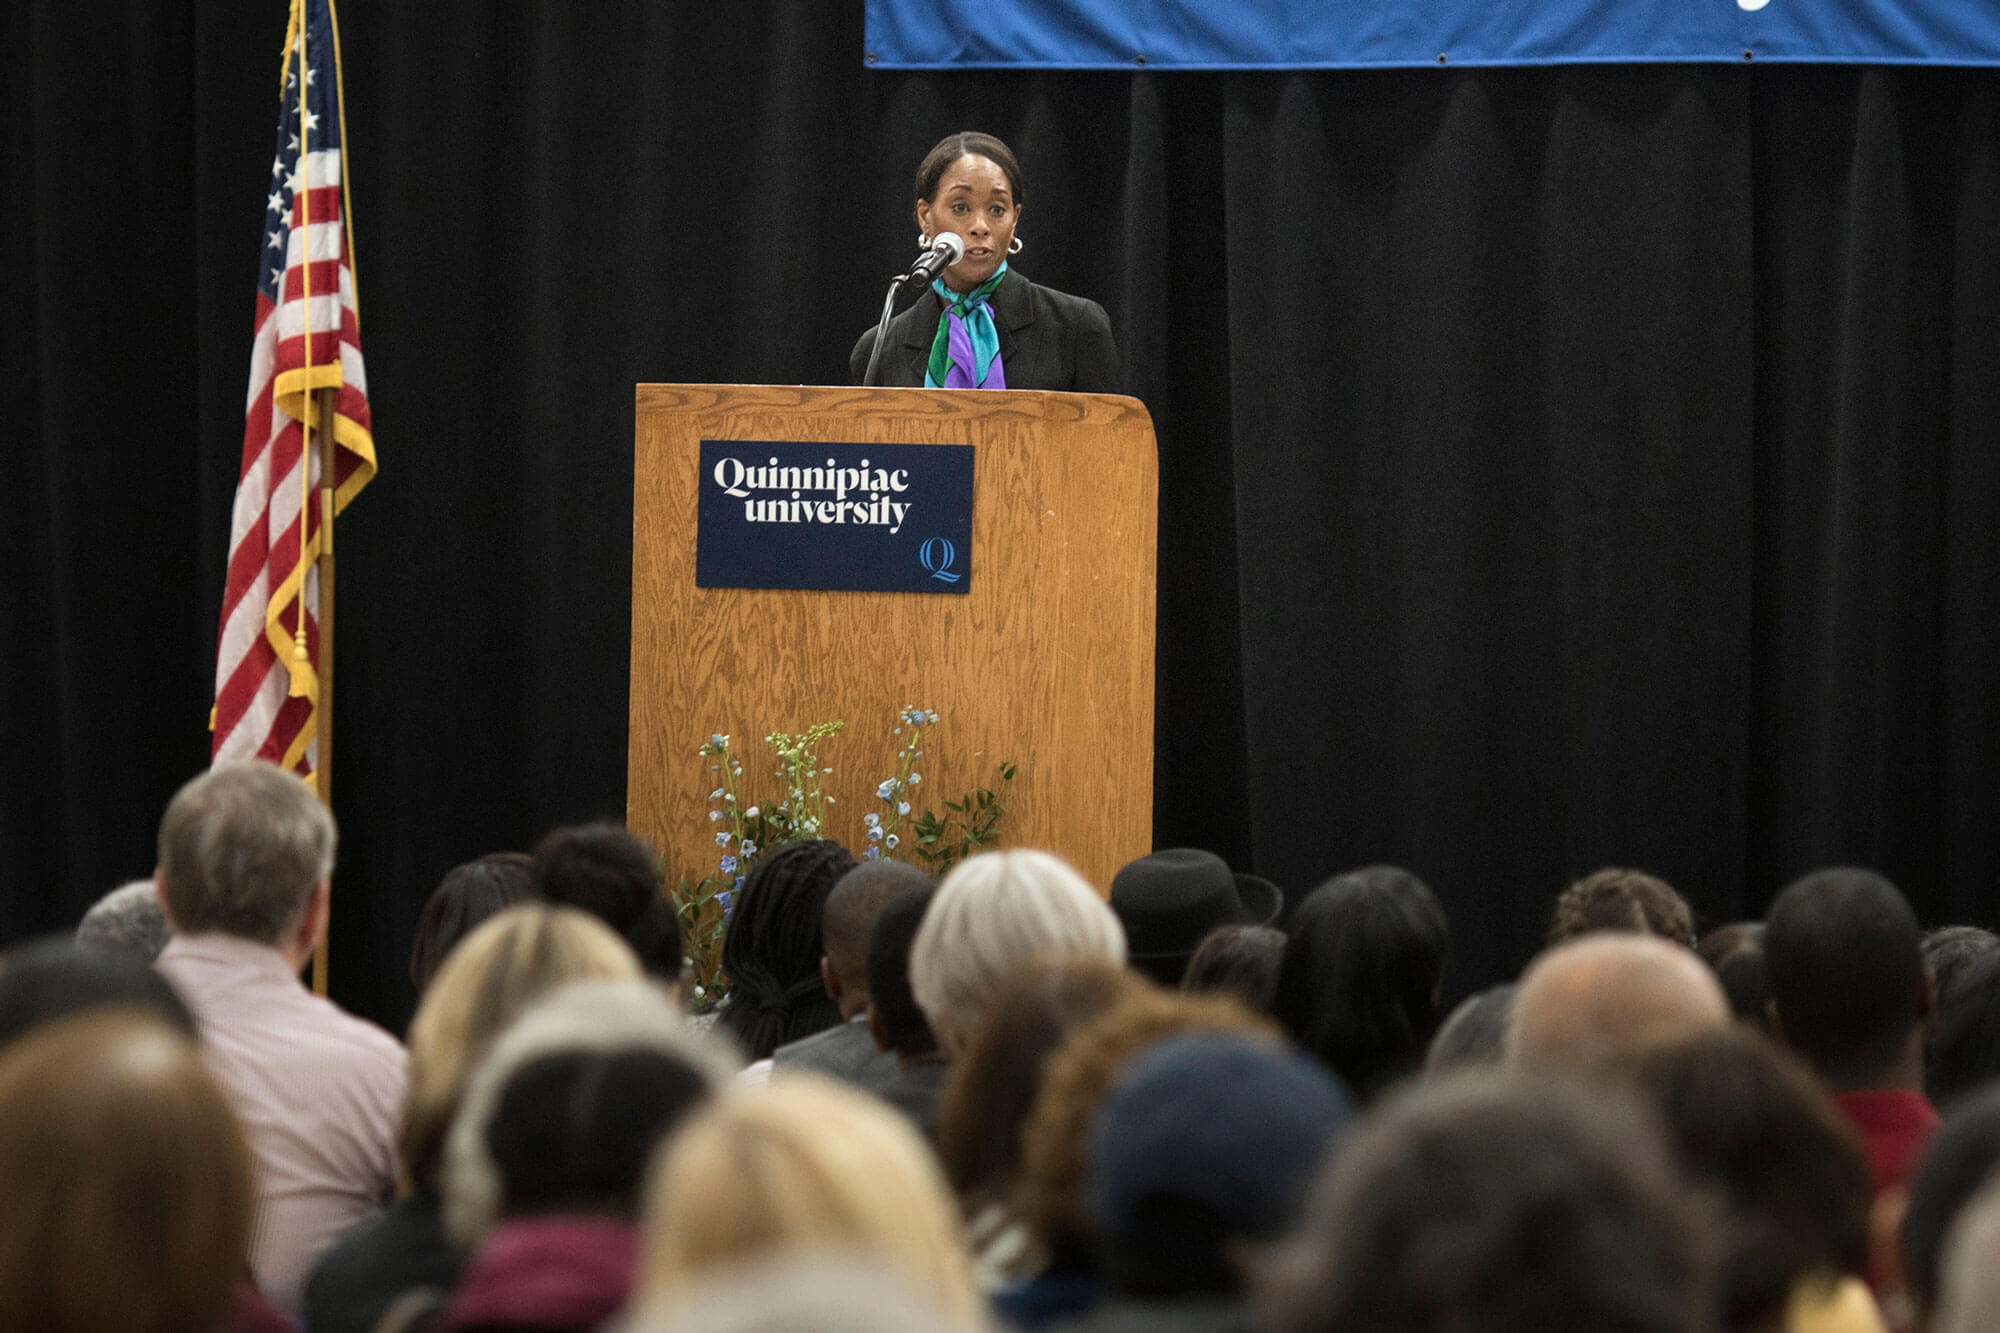 Margot Lee Shetterly speaks at a podium in front of a full audience.